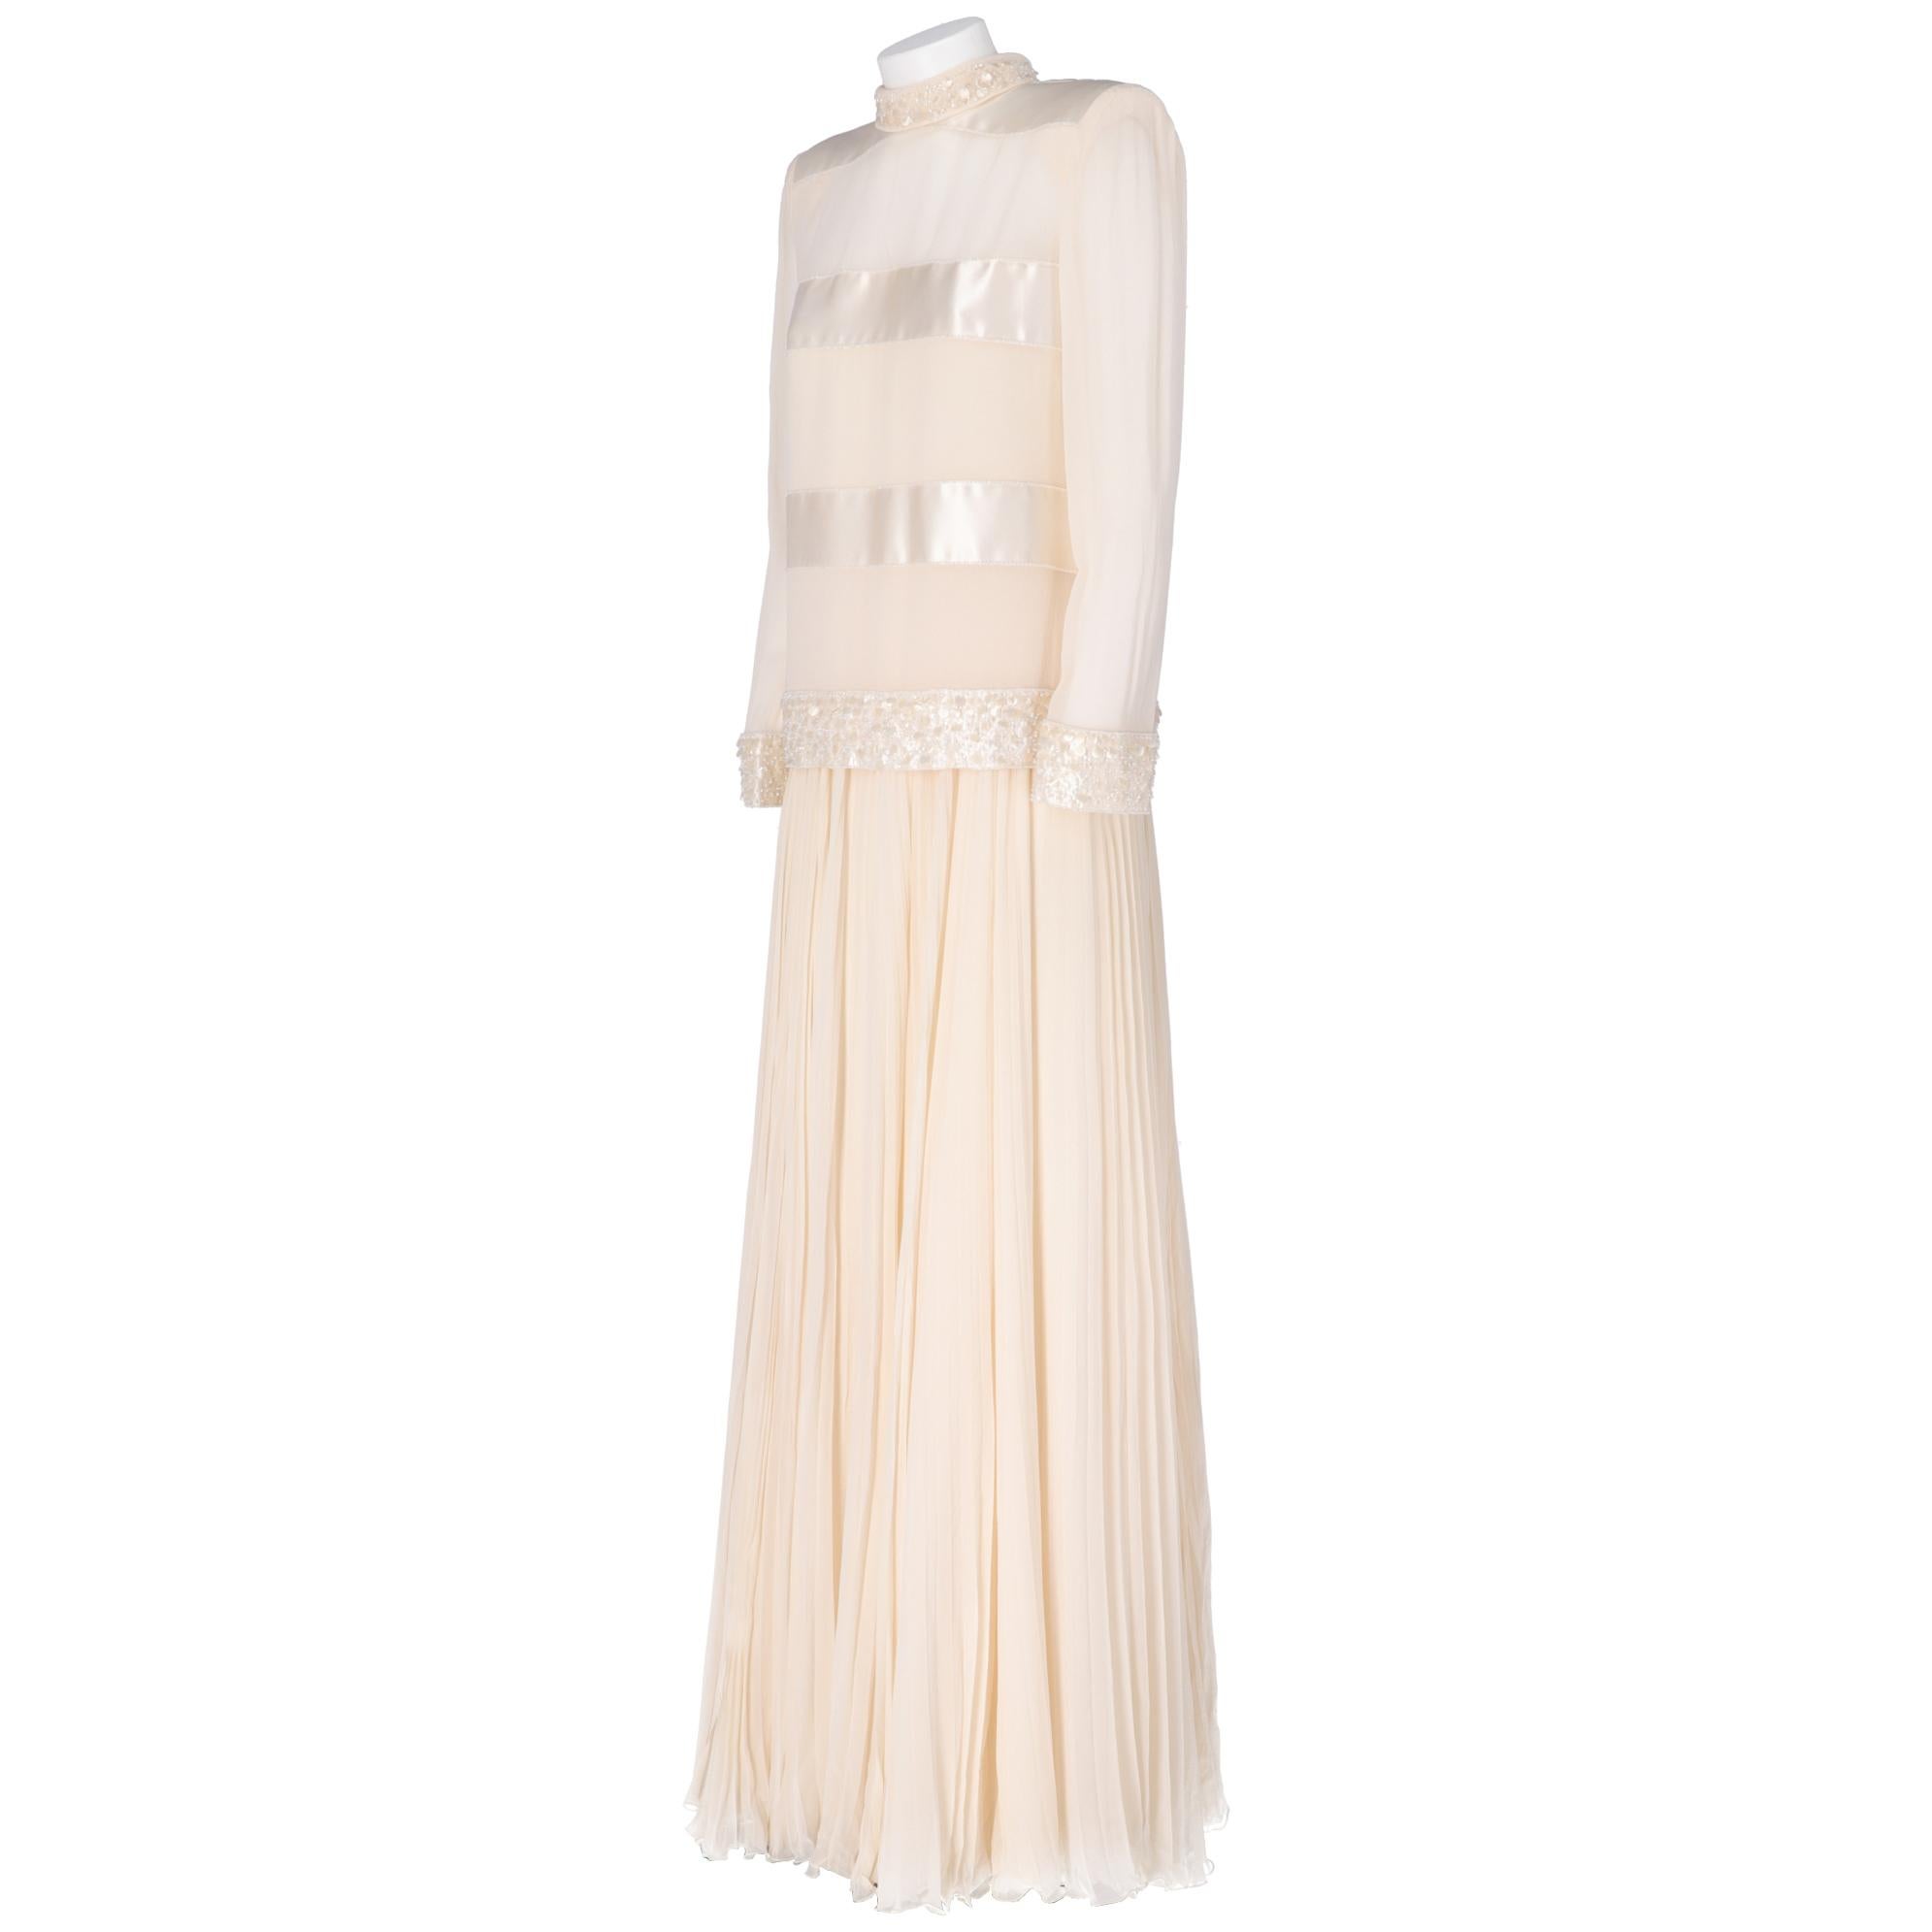 Tailored wedding dress in ivory-colored silk georgette, consisting of a two-ply pleated skirt with inner lining and collar with spikes on the back, padded straps, decorative bands in silk satin and beaded and sequined appliqués bow. Back zip